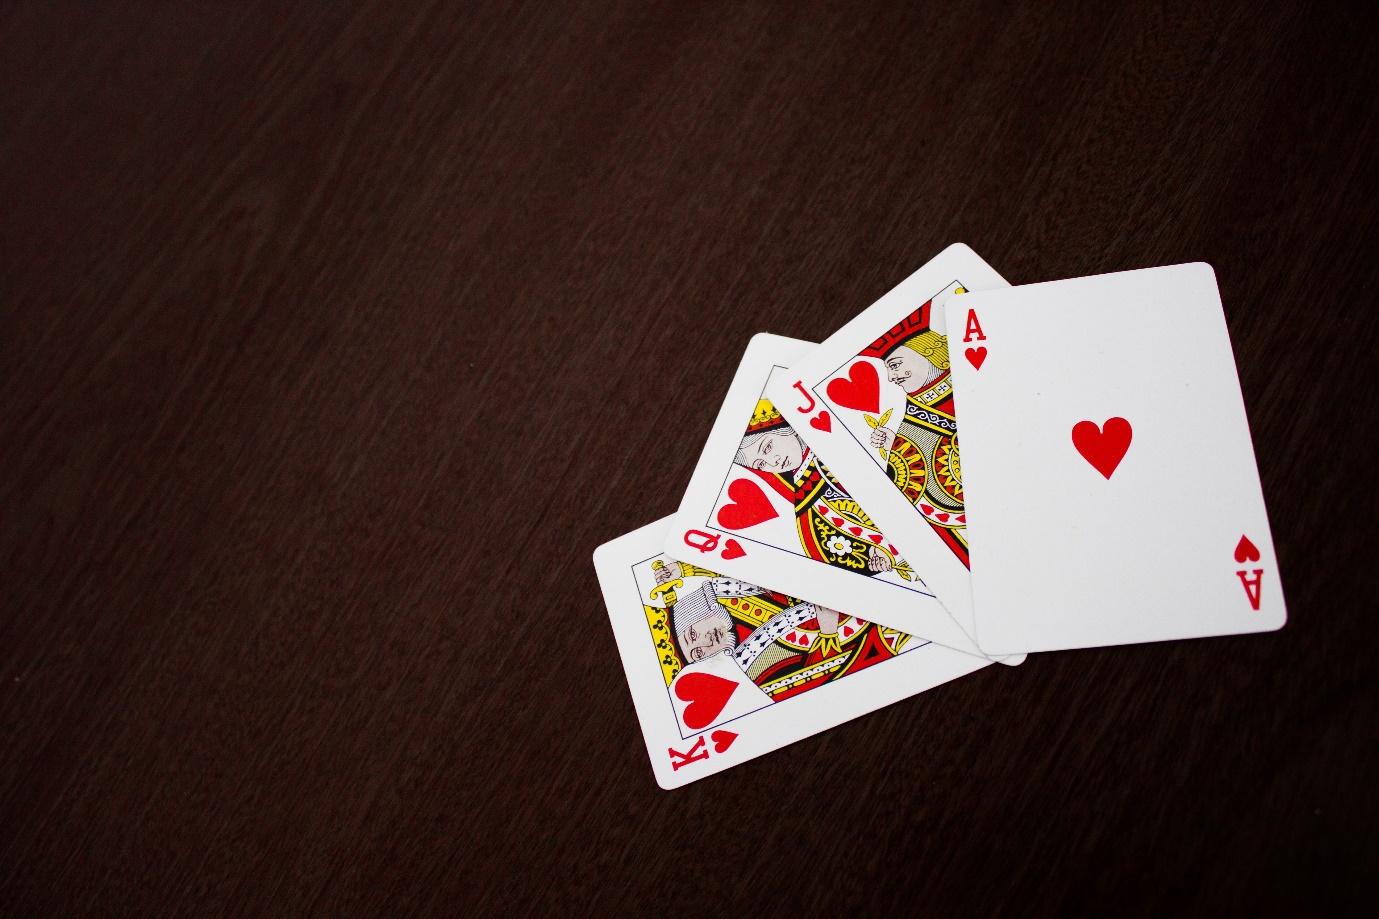 A close-up of a deck of cards

Description automatically generated